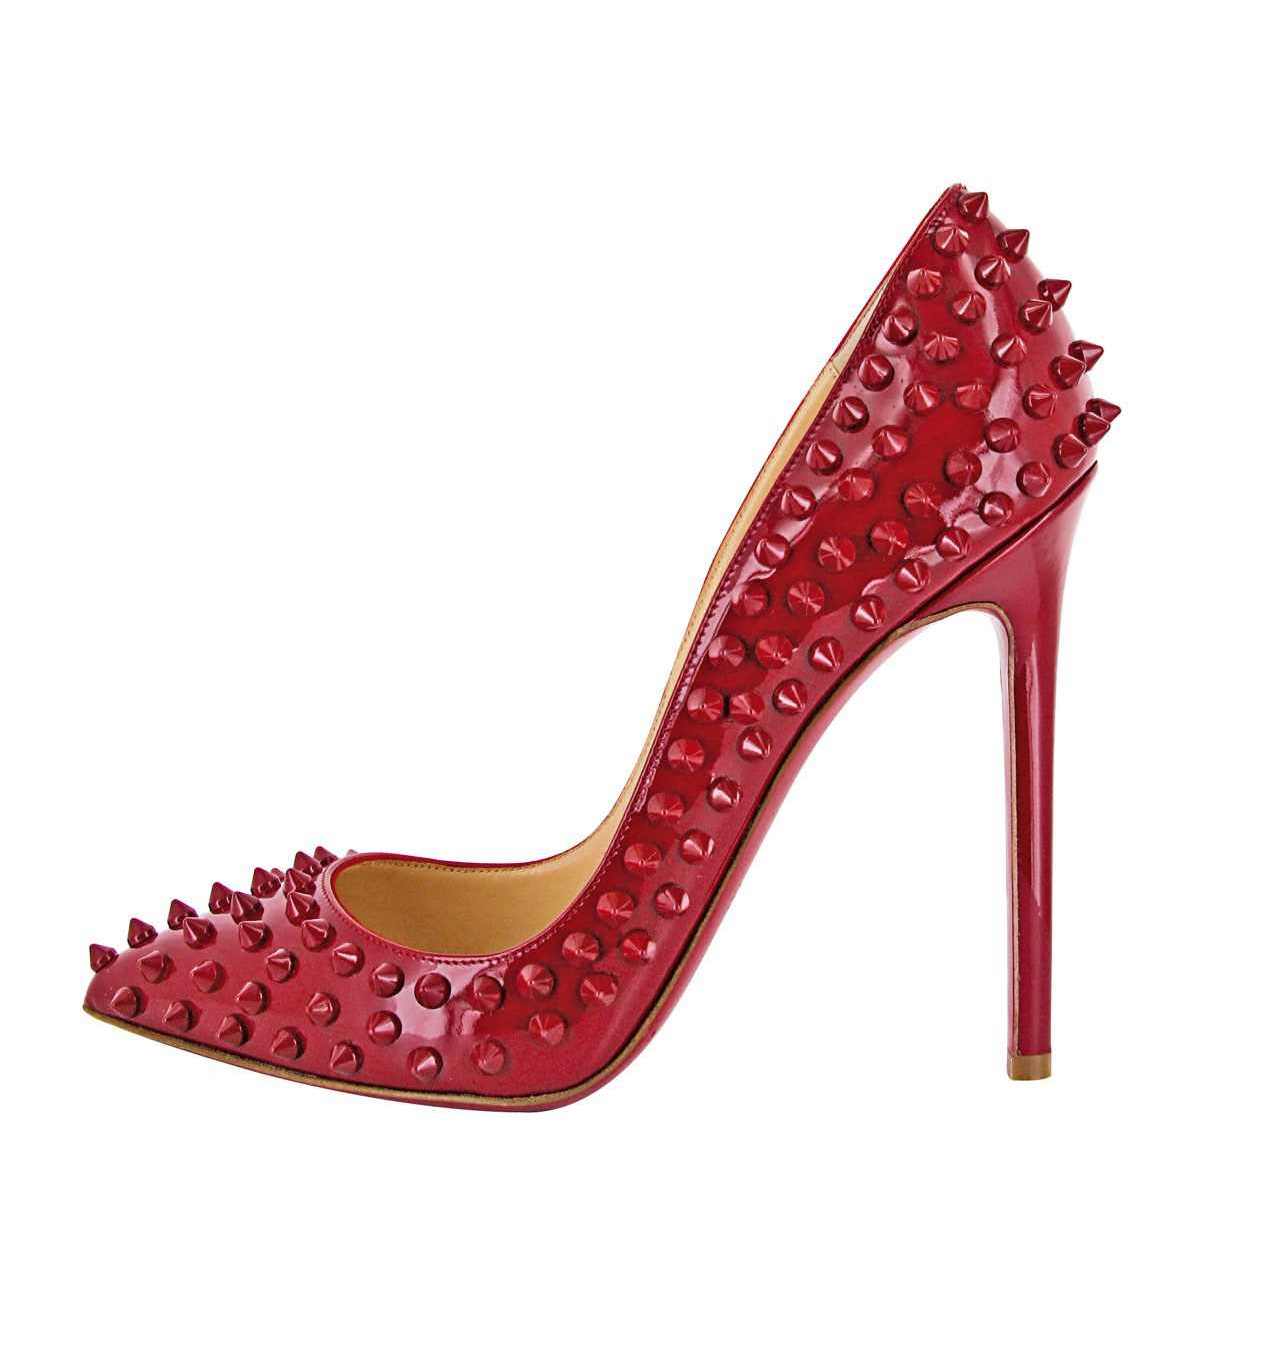 "Sexy Shoes" 2012 1st position: Christian Louboutin's red-studded patent leather pump (Photo courtesy | Thomas Iannaccone/WWD)